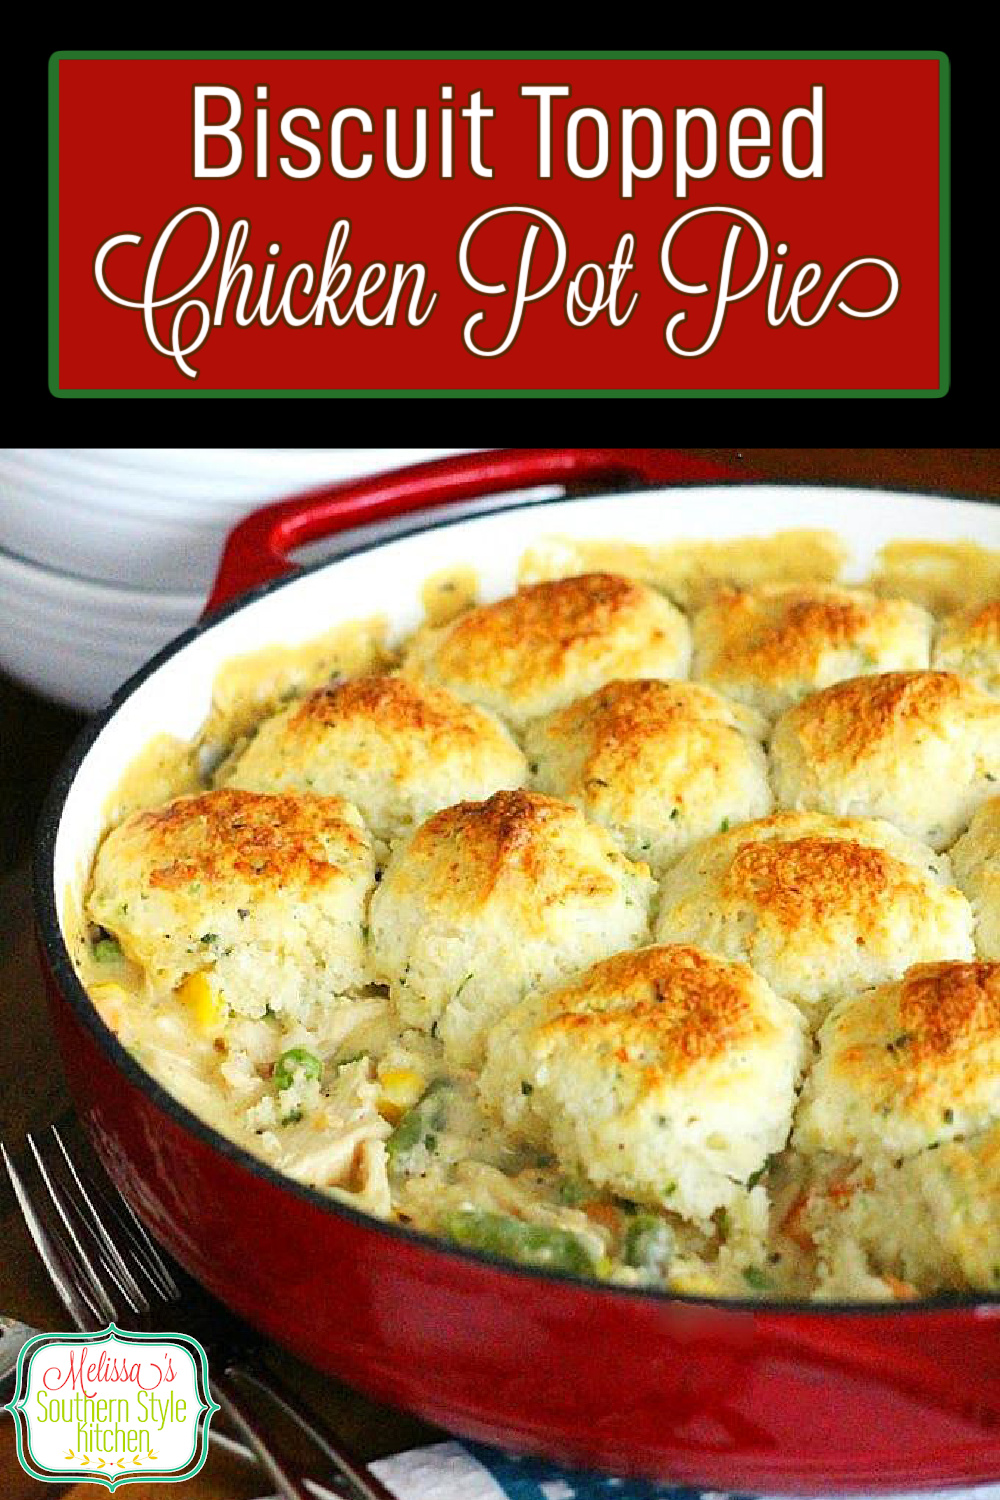 Biscuit Topped Chicken Pot Pie is a tummy filling meal that won't break the bank #chickenpotpie #southernbiscuits #biscuit #dinnerideas #easychickenrecipes #casseroles #southernfood #southernrecipes #potpie #dinner #dinnerideas #chickenrecipes #easyrecipes #southernbiscuits